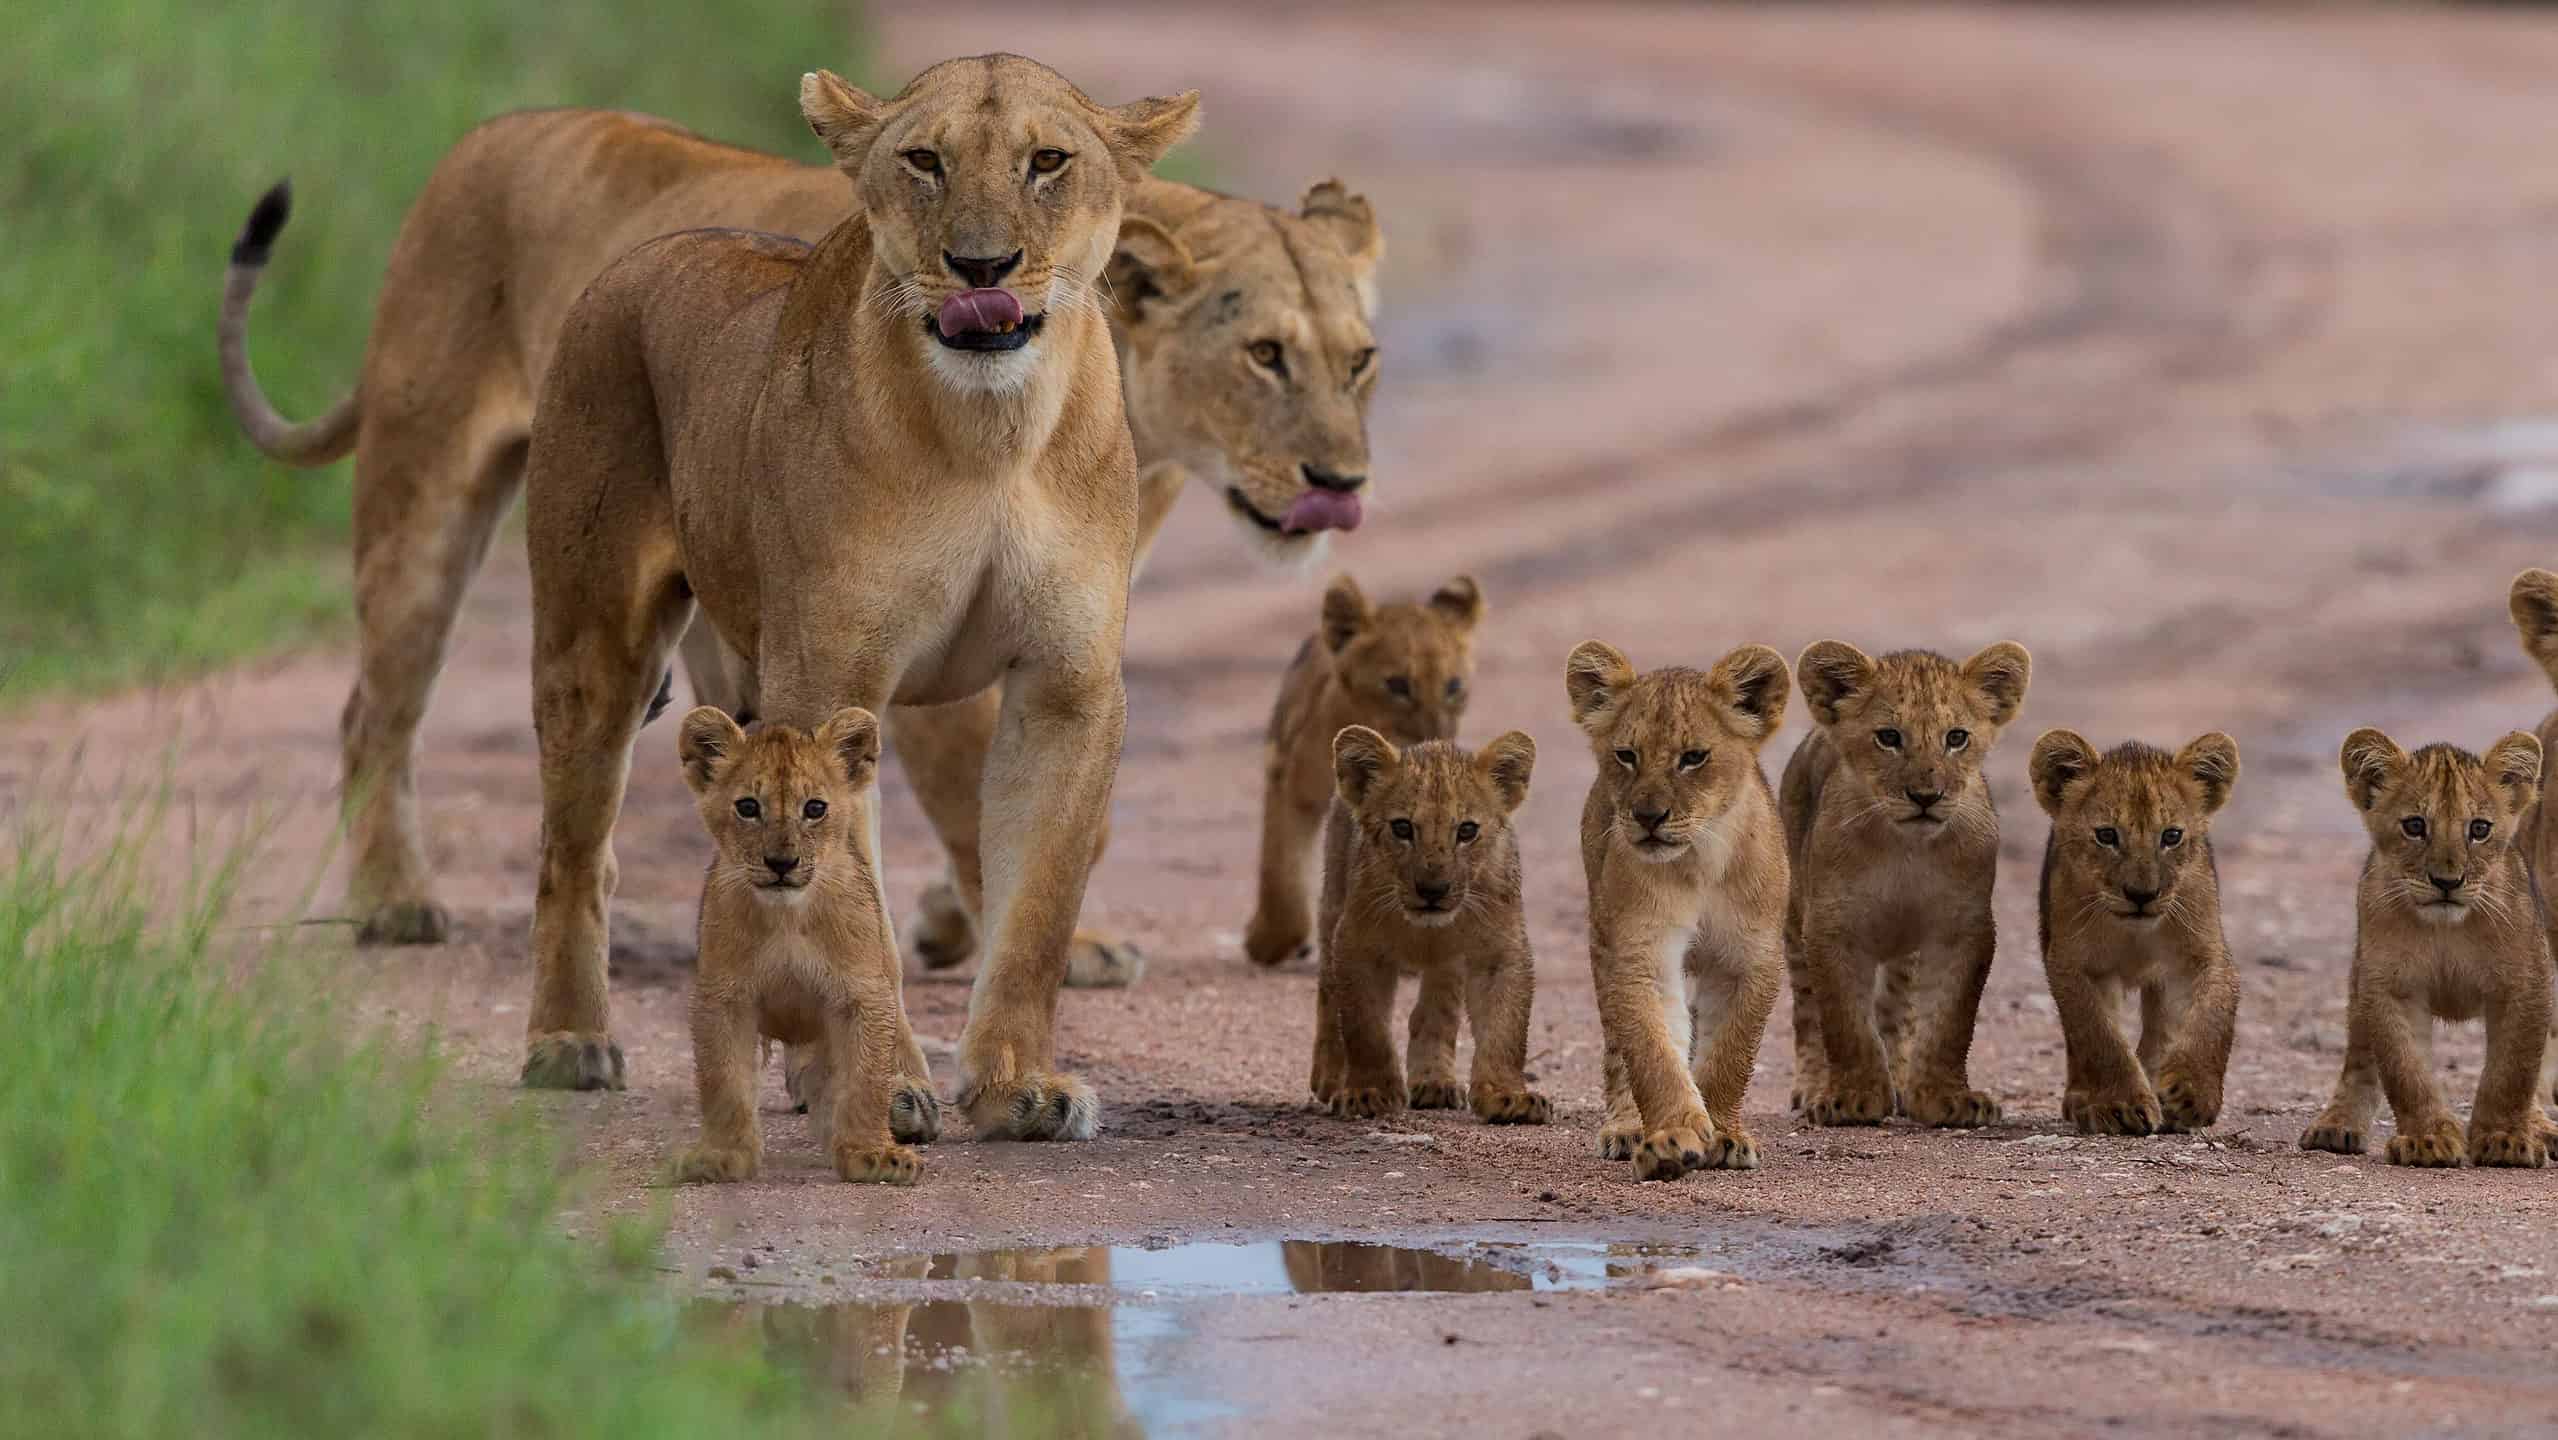 Lionesses and cubs